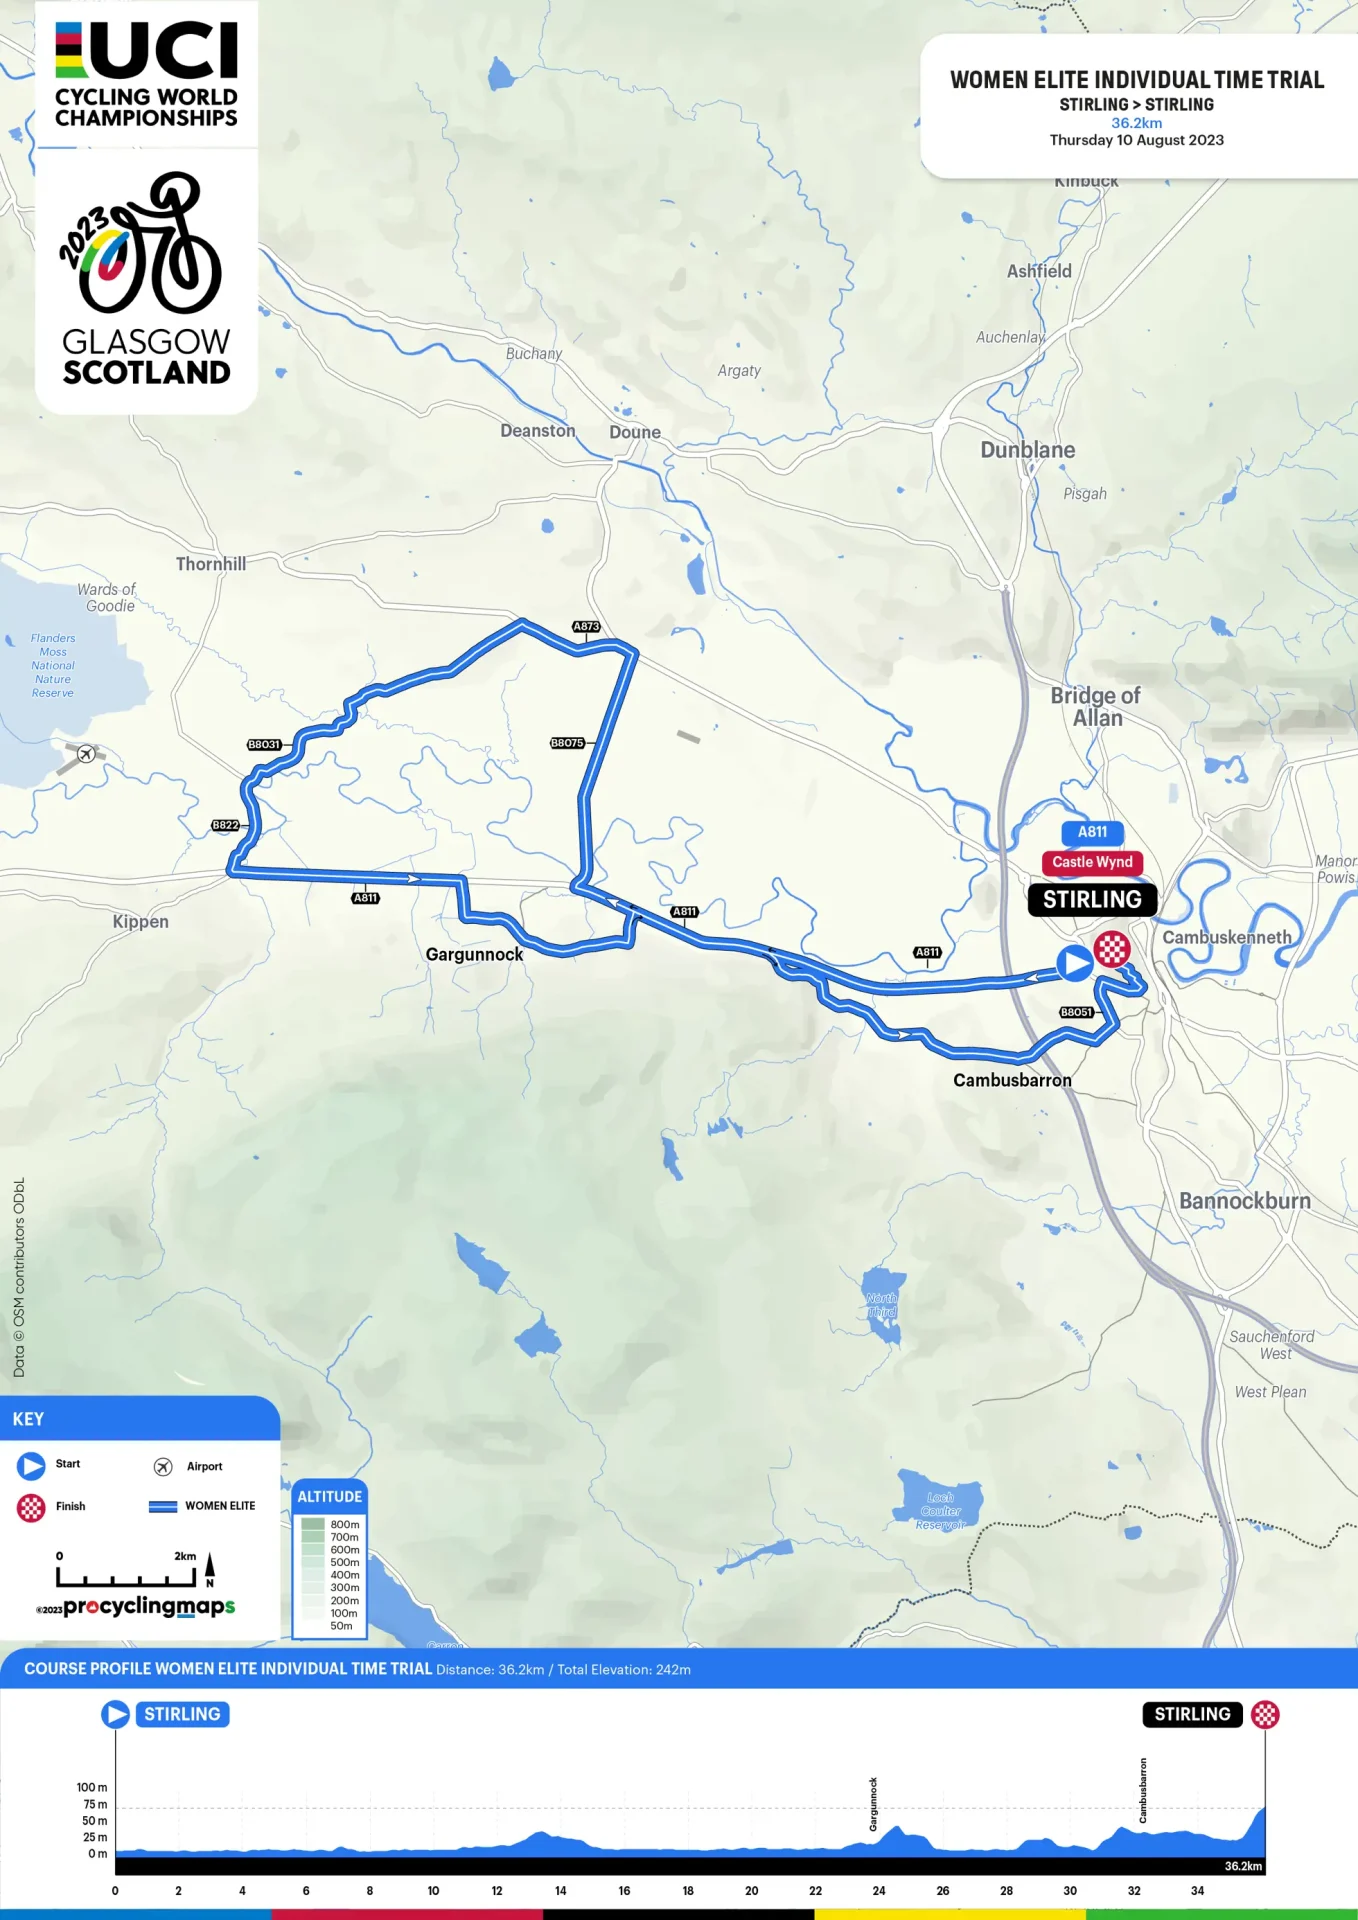 A map and profile of the women's ITT route, starting and finishing in Stirling, Scotland with a final climb to Stirling Castle.